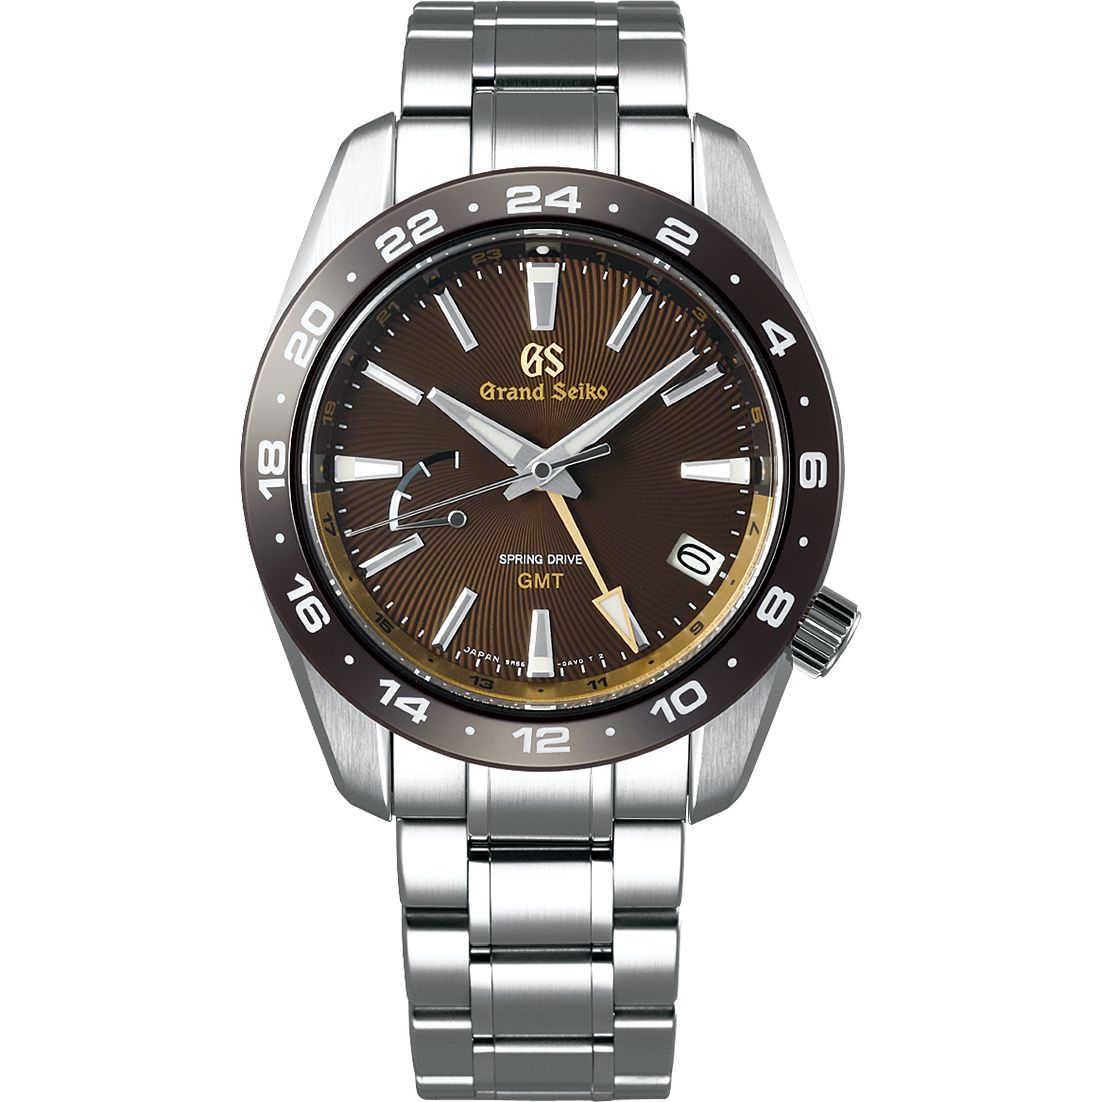 Grand Seiko SBGE263 Spring Drive GMT brown dial stainless steel ceramic men's watches